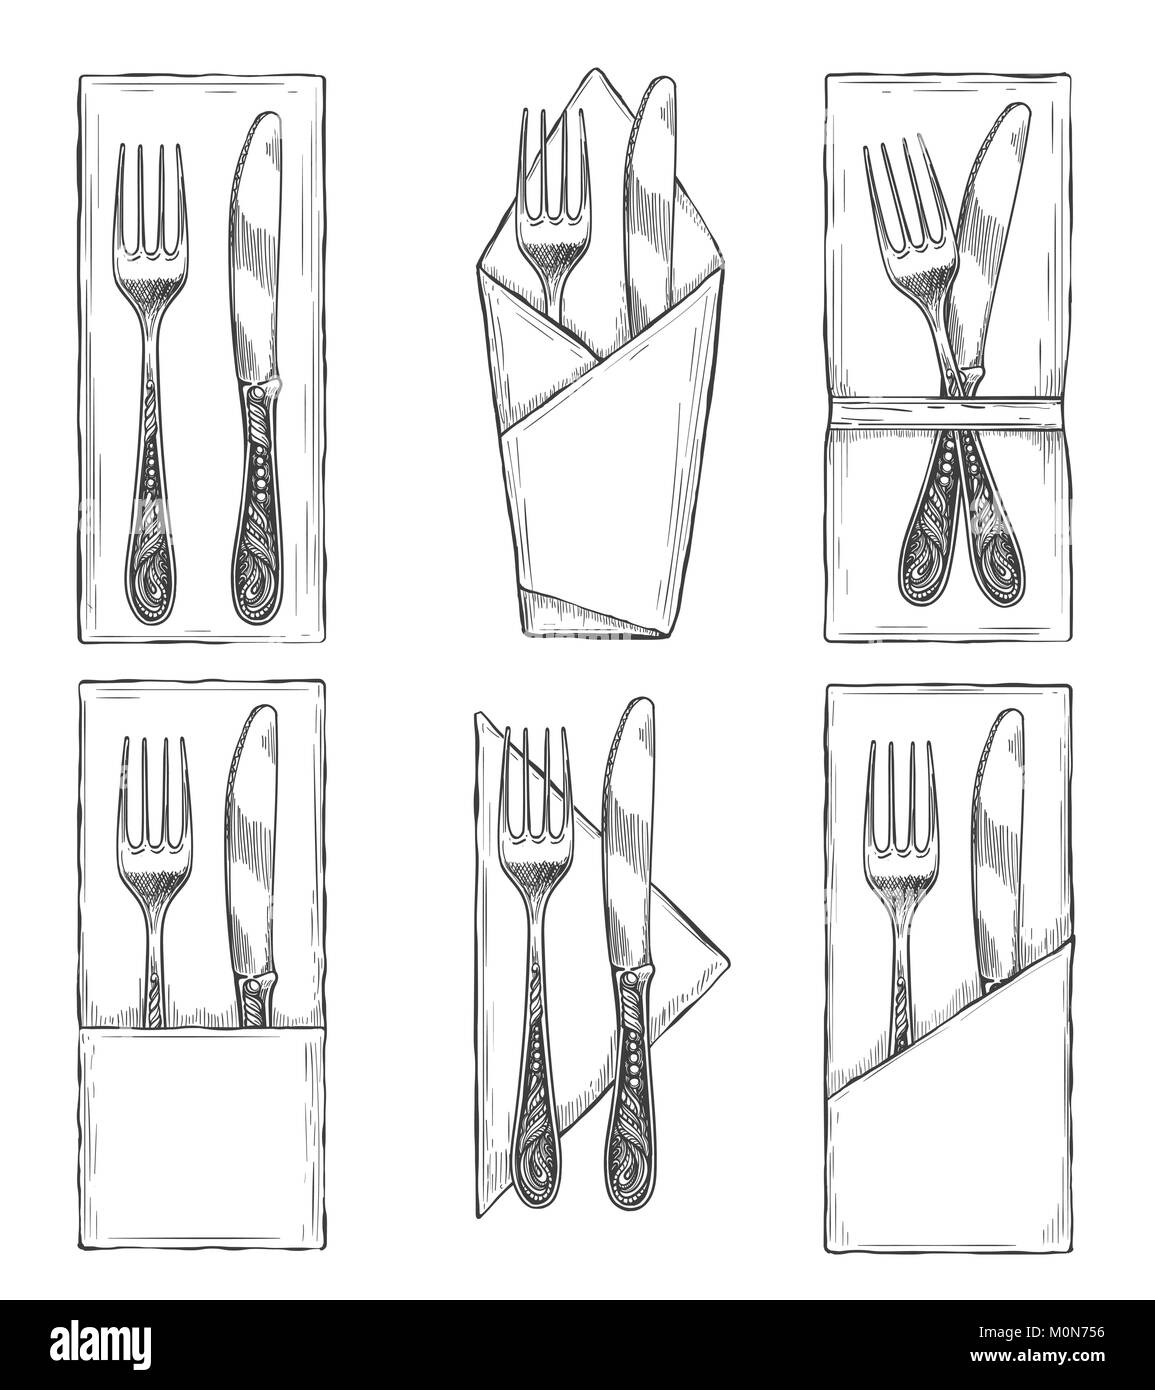 Cutlery on napkins sketch. Fork, knife and spoon on napkin set drawing, dinner table etiquette vector illustration Stock Vector